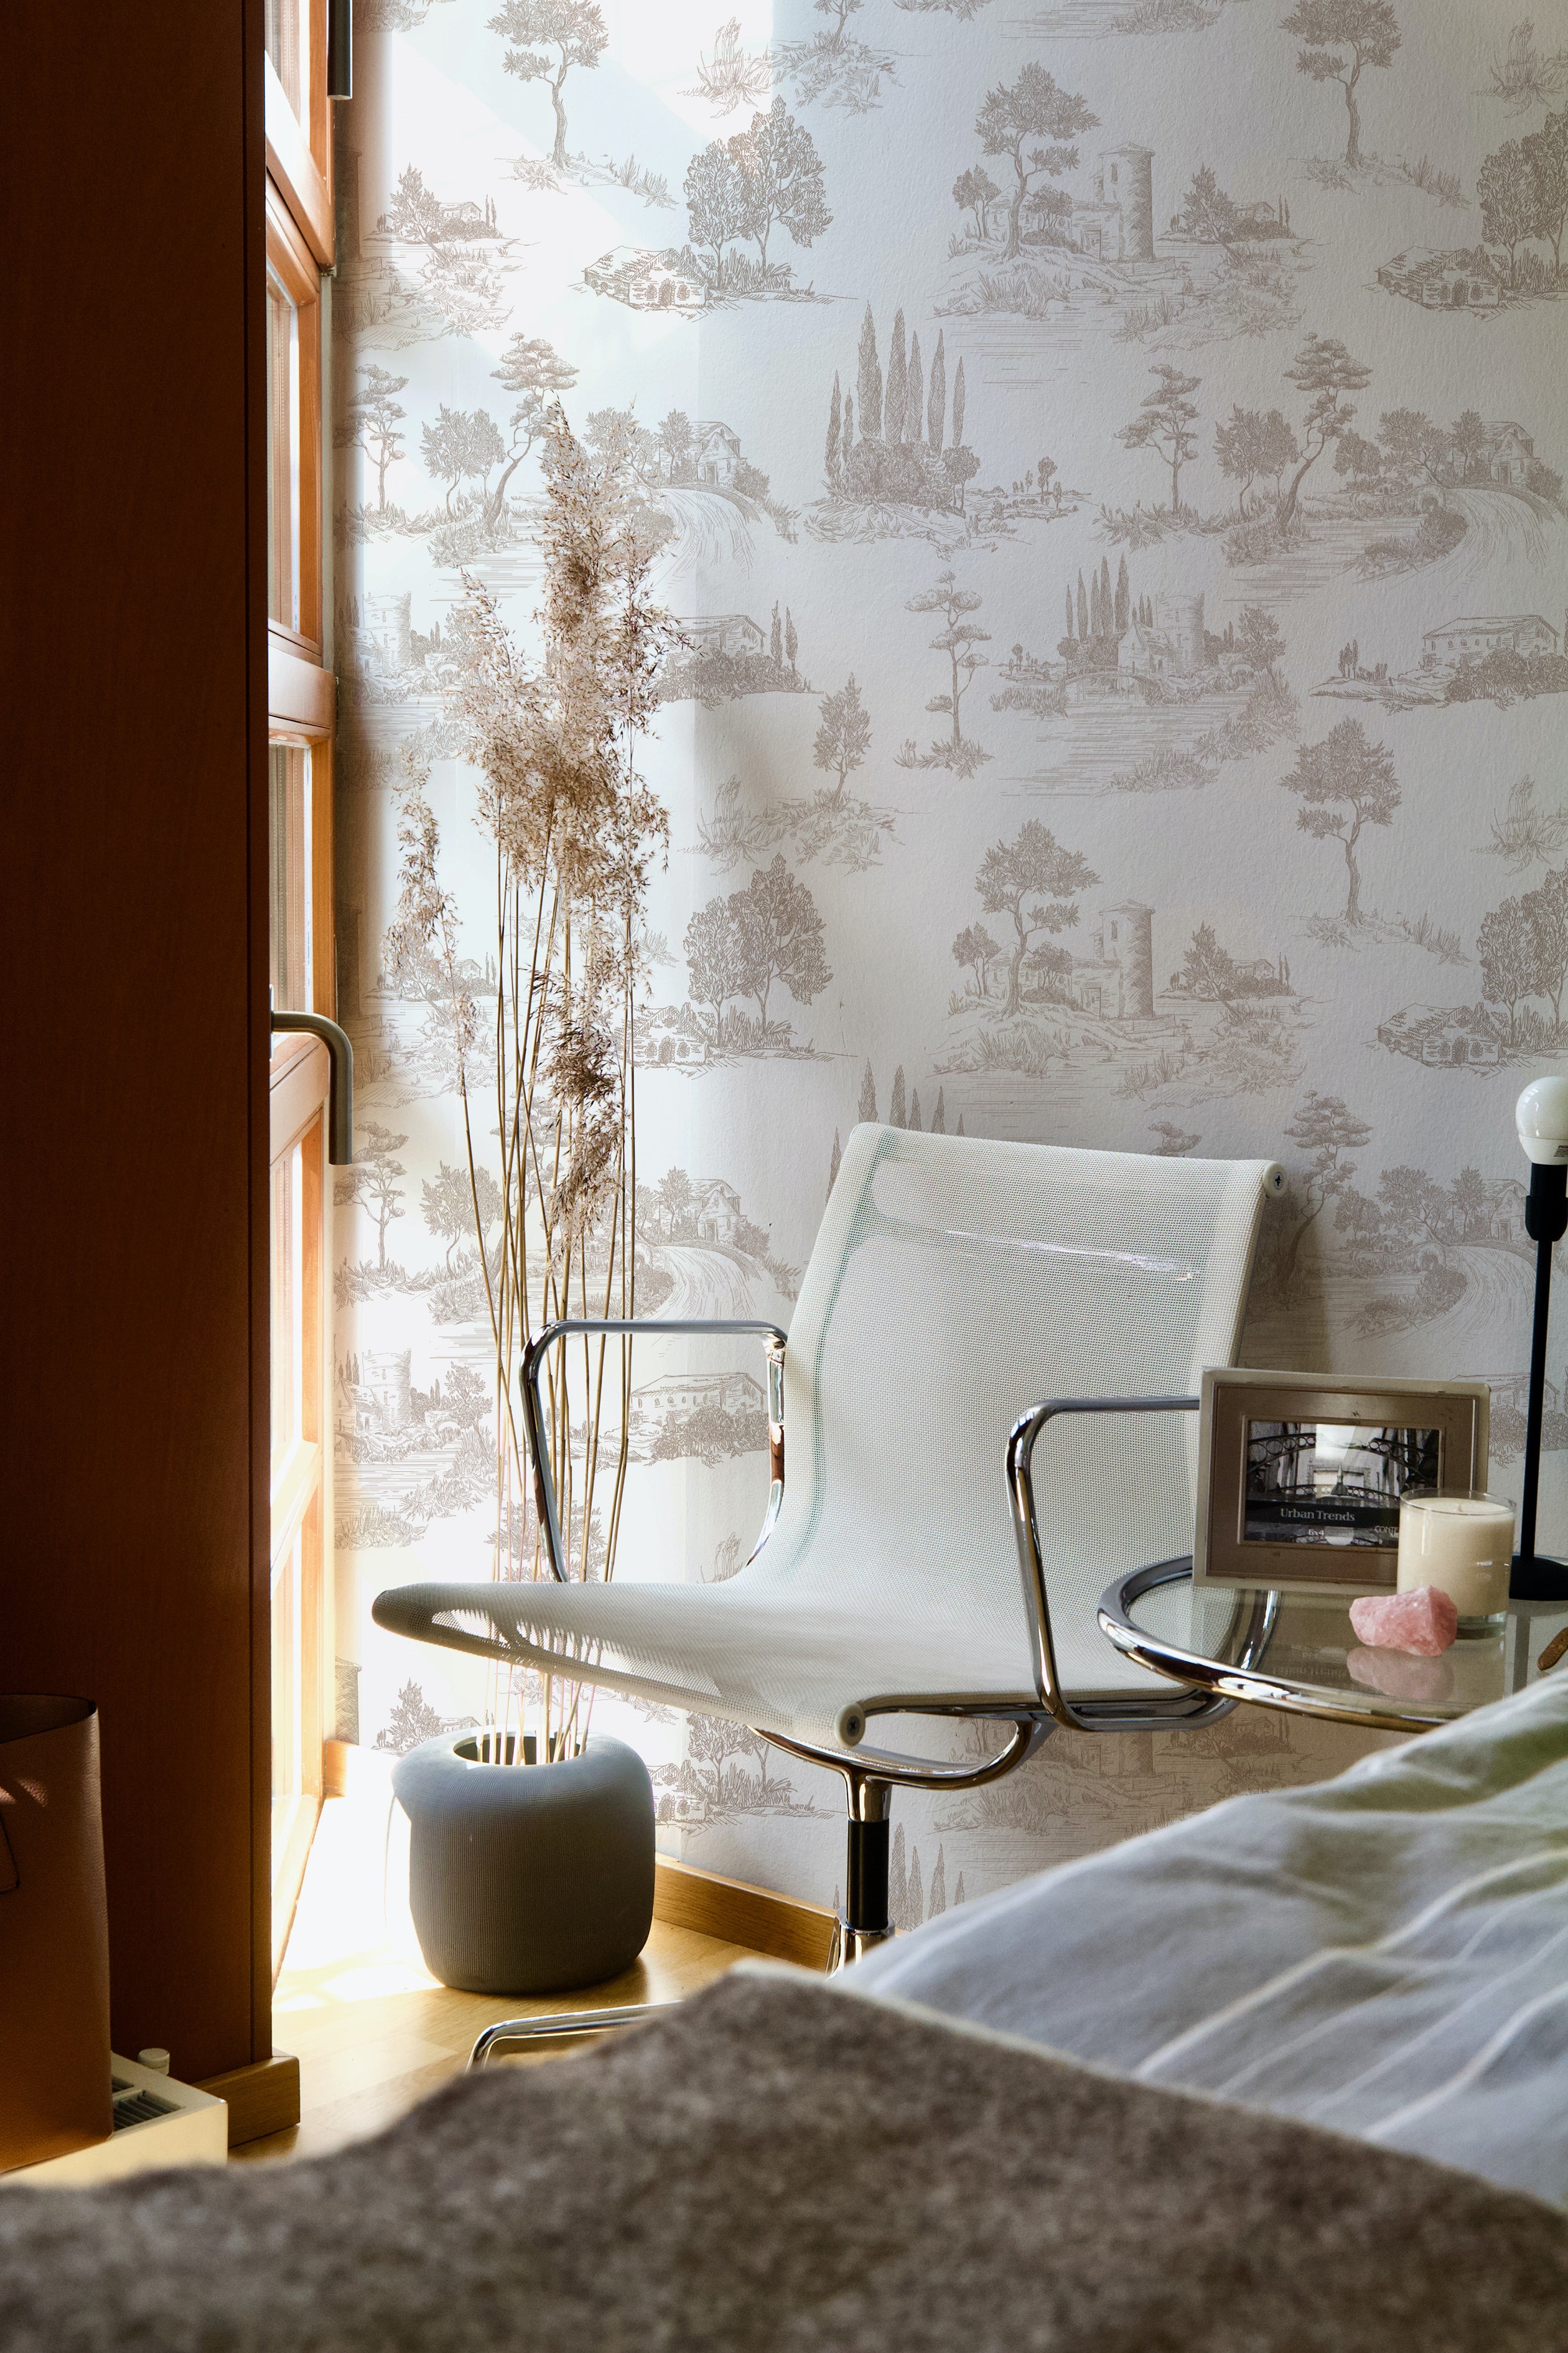 A cozy bedroom corner illuminated by warm sunlight, with the Farmhouse Toile Wallpaper providing a quaint and picturesque backdrop to a modern chair and side table, blending contemporary furnishings with the timeless allure of the toile pattern.